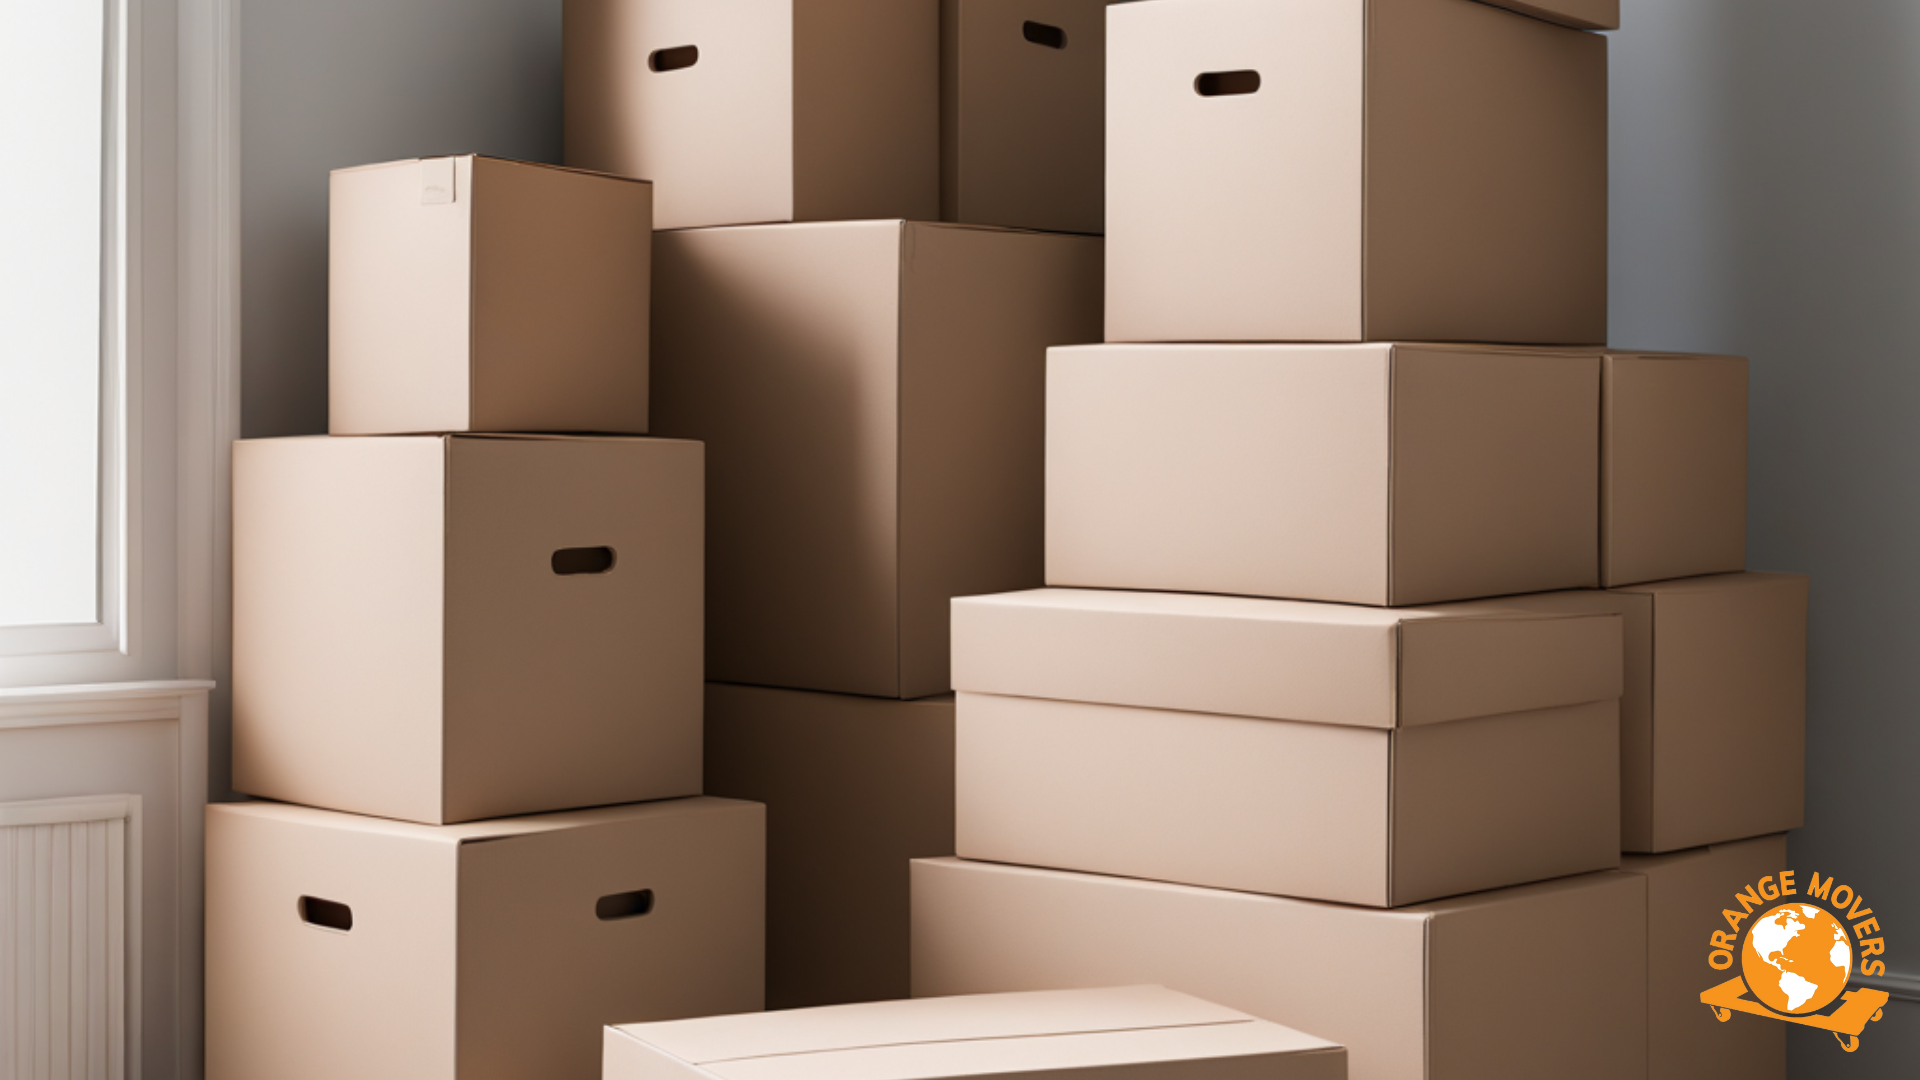 Packing and Moving Movers Companies in Pompano Beach Florida